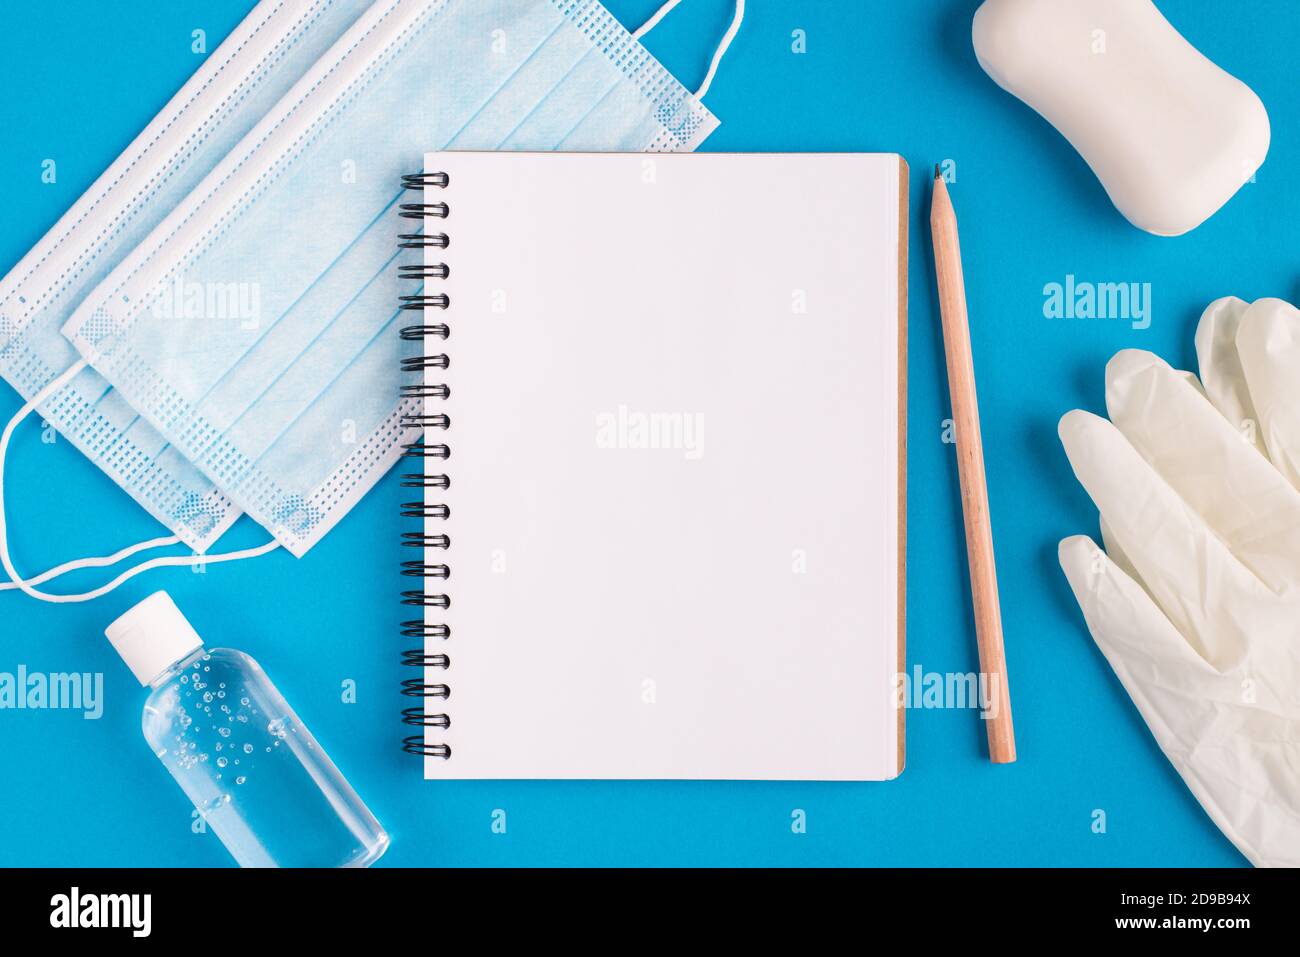 Working education study from home concept. Top layout flatlay close up photo of empty blank clear paper page open sketch pad disinfection bottle rubbe Stock Photo